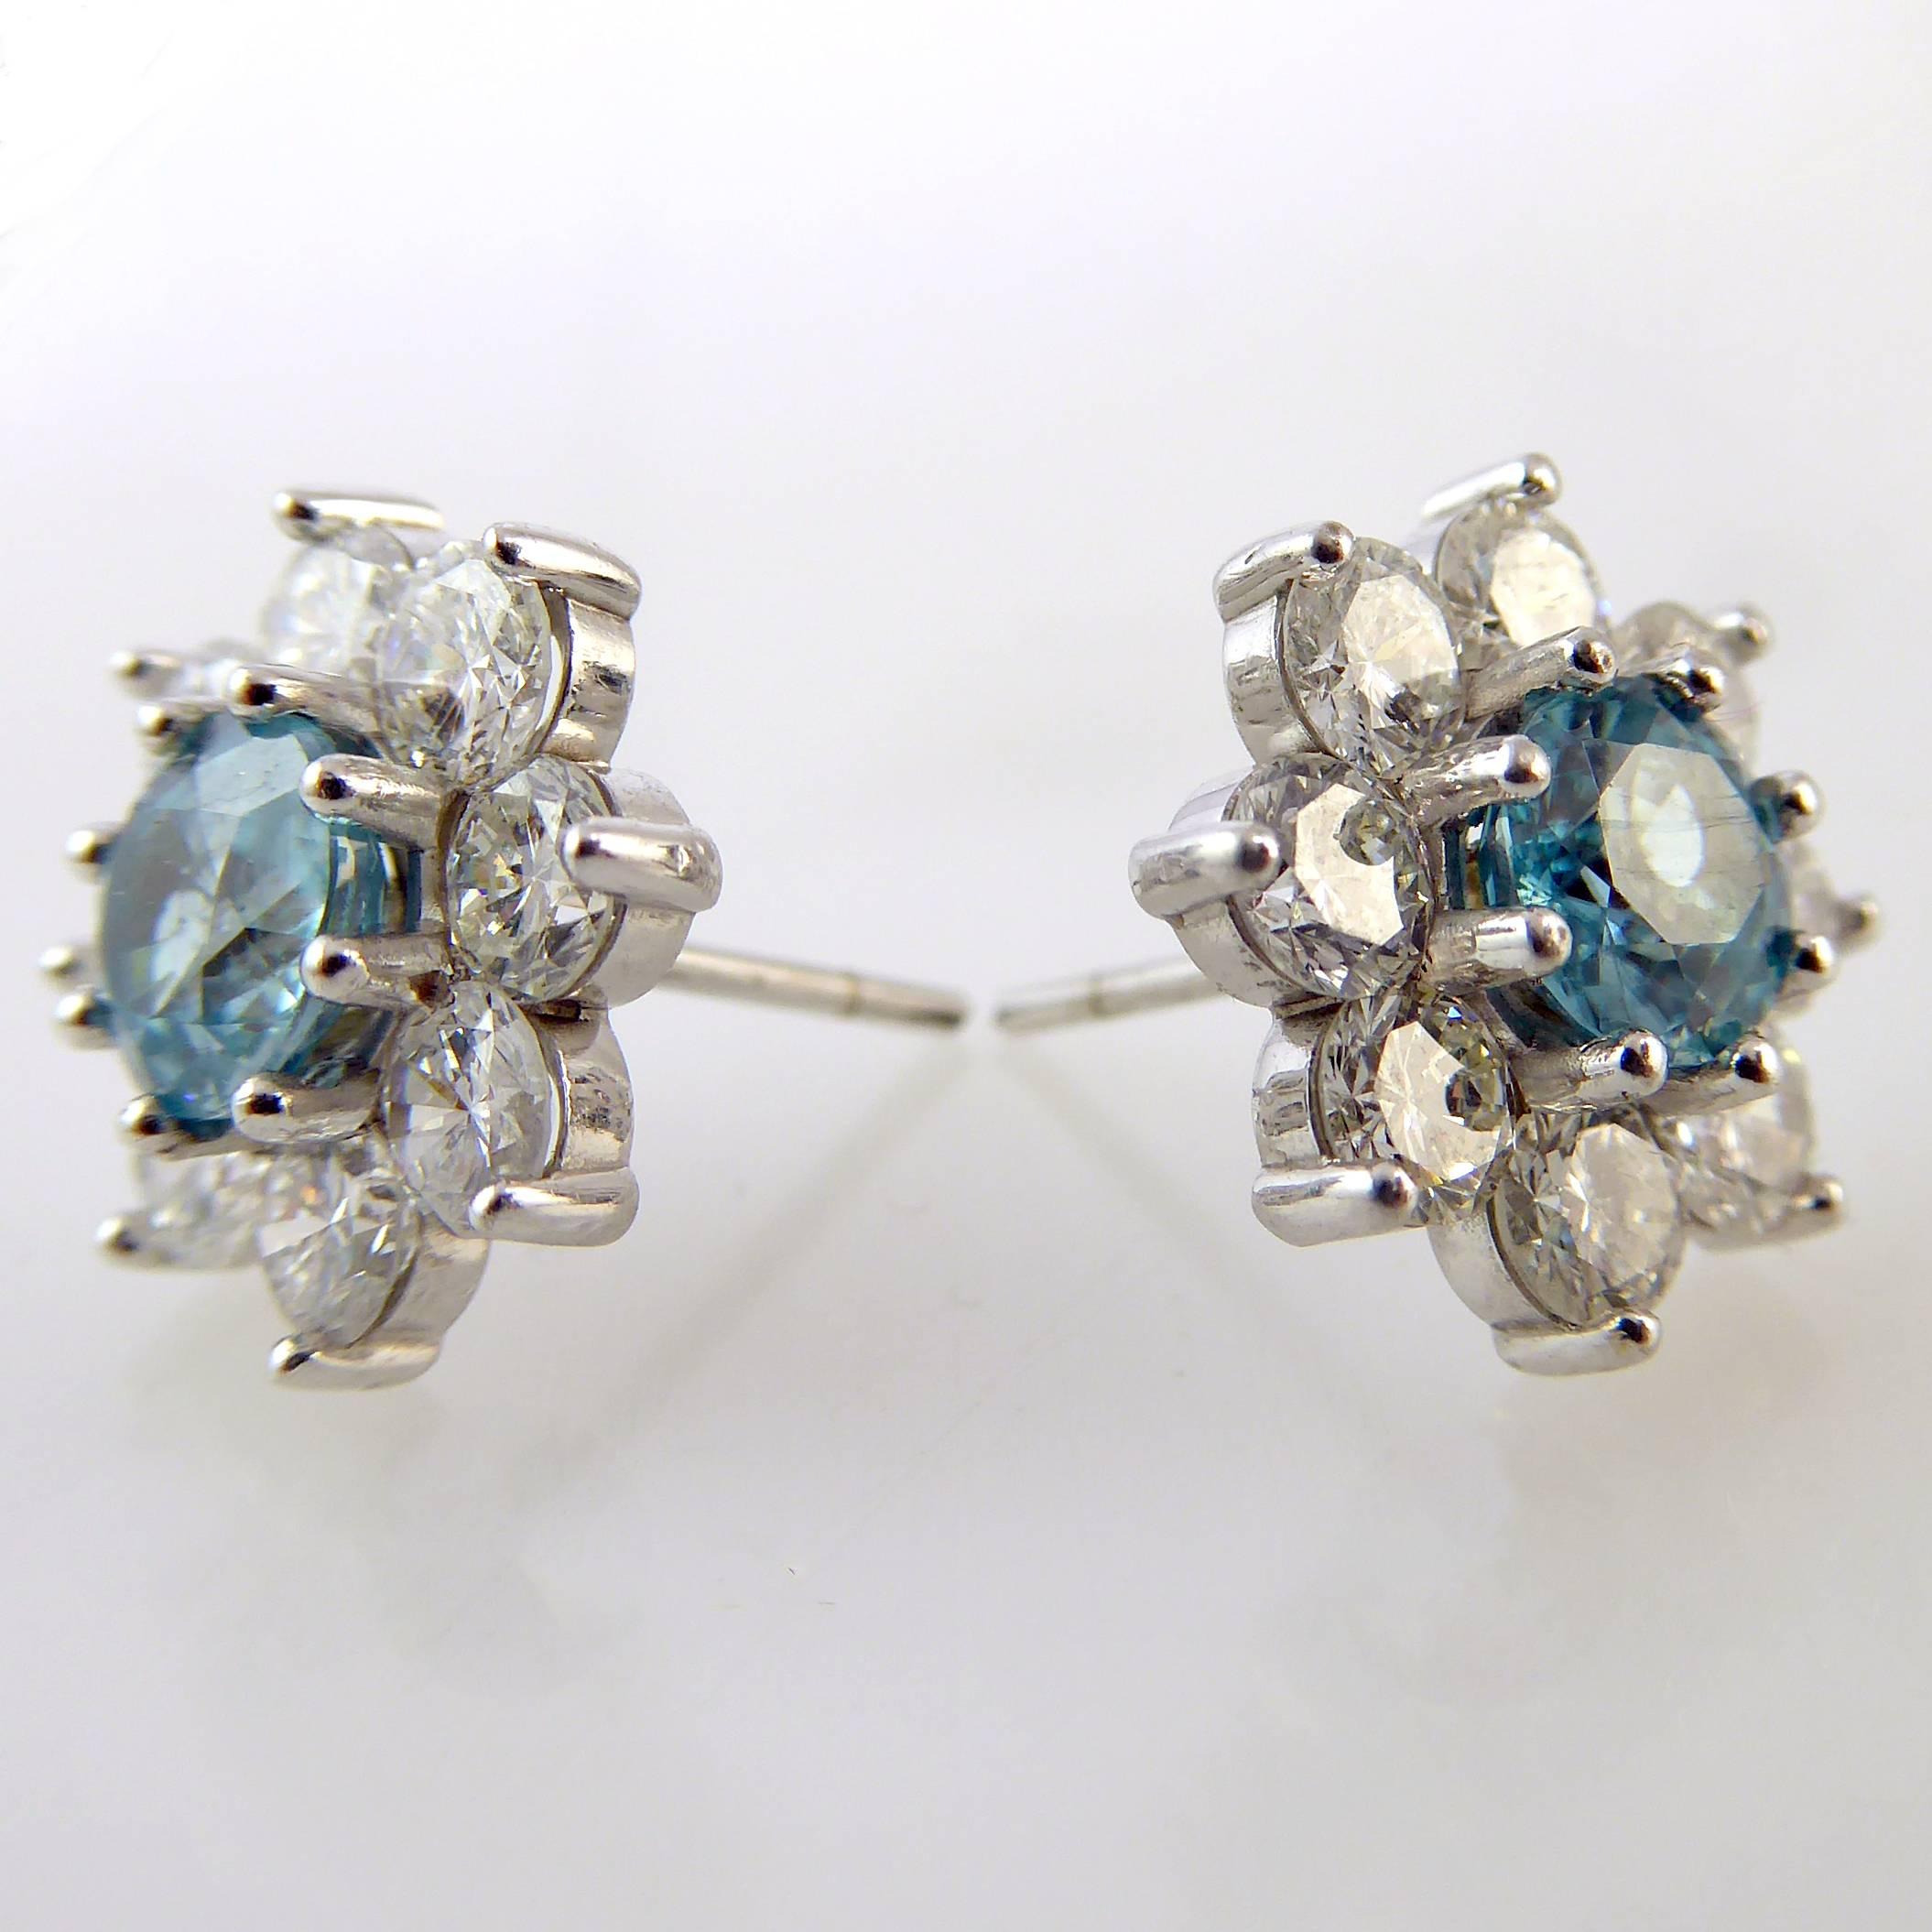 Vintage Earrings, Diamond and Blue Zircon Cluster Studs, 18 Carat White Gold 2